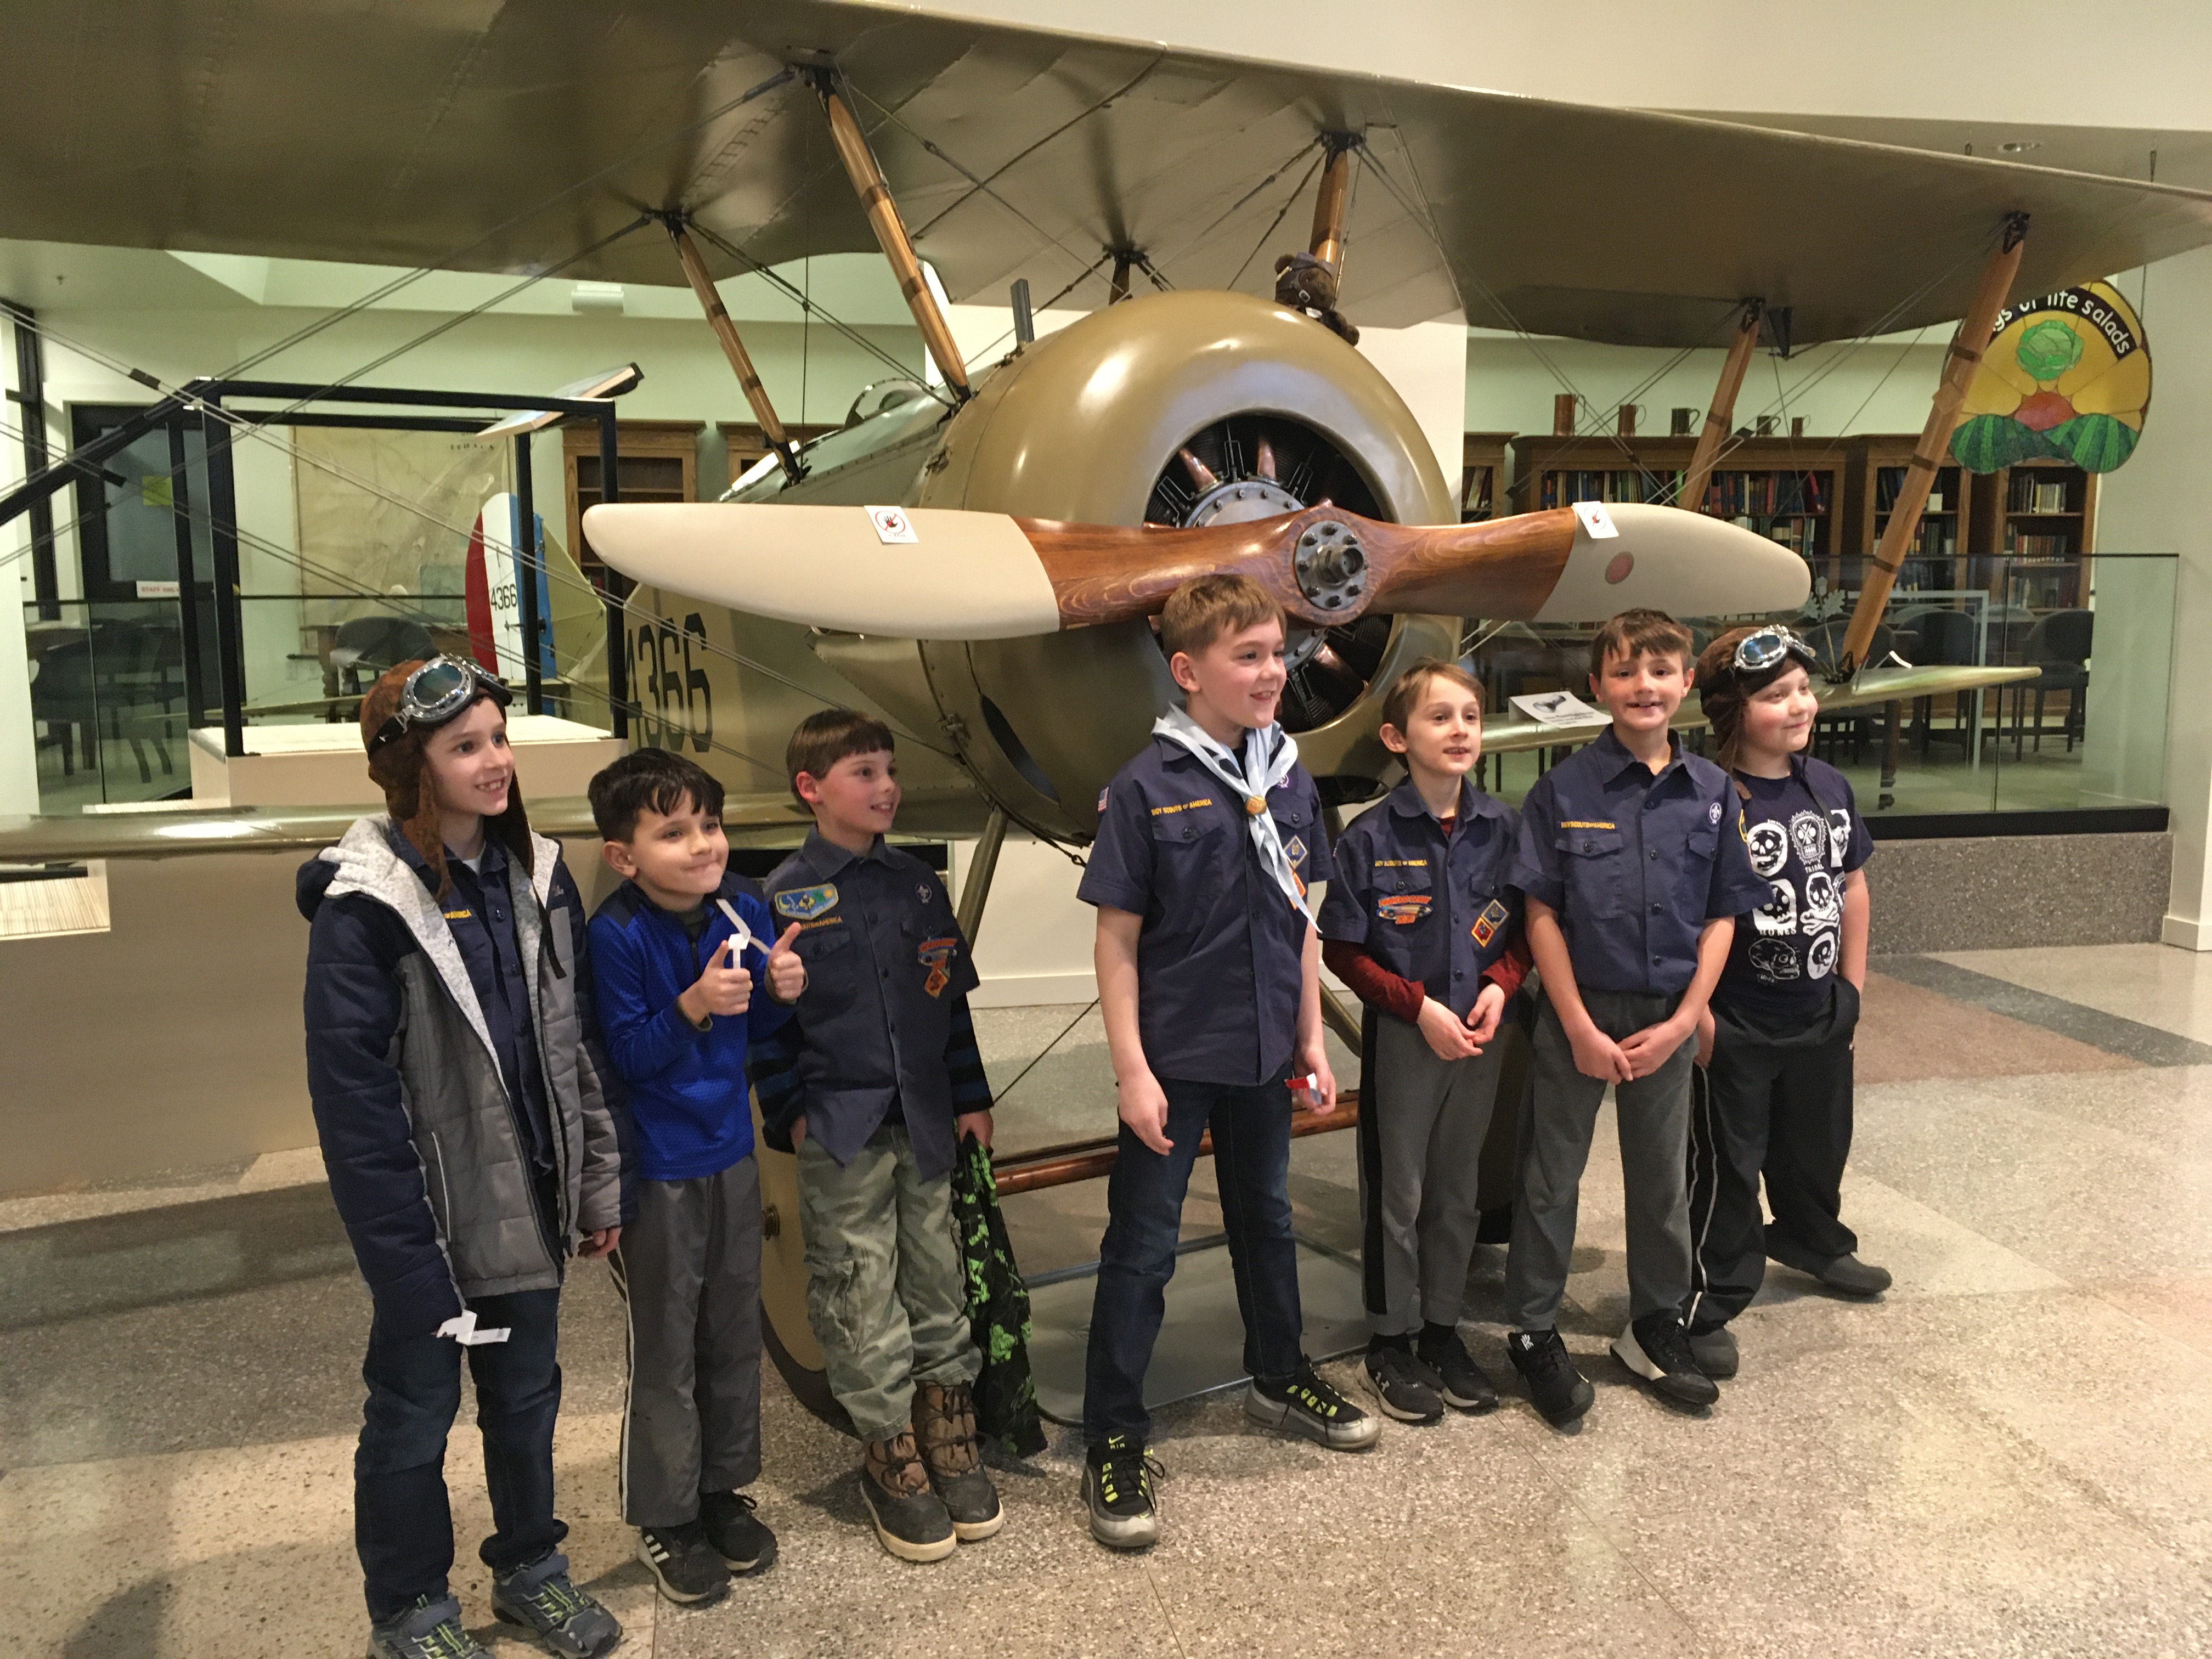 Image of a group of children standing in front of the Tommy Morse plane in the exhibit hall